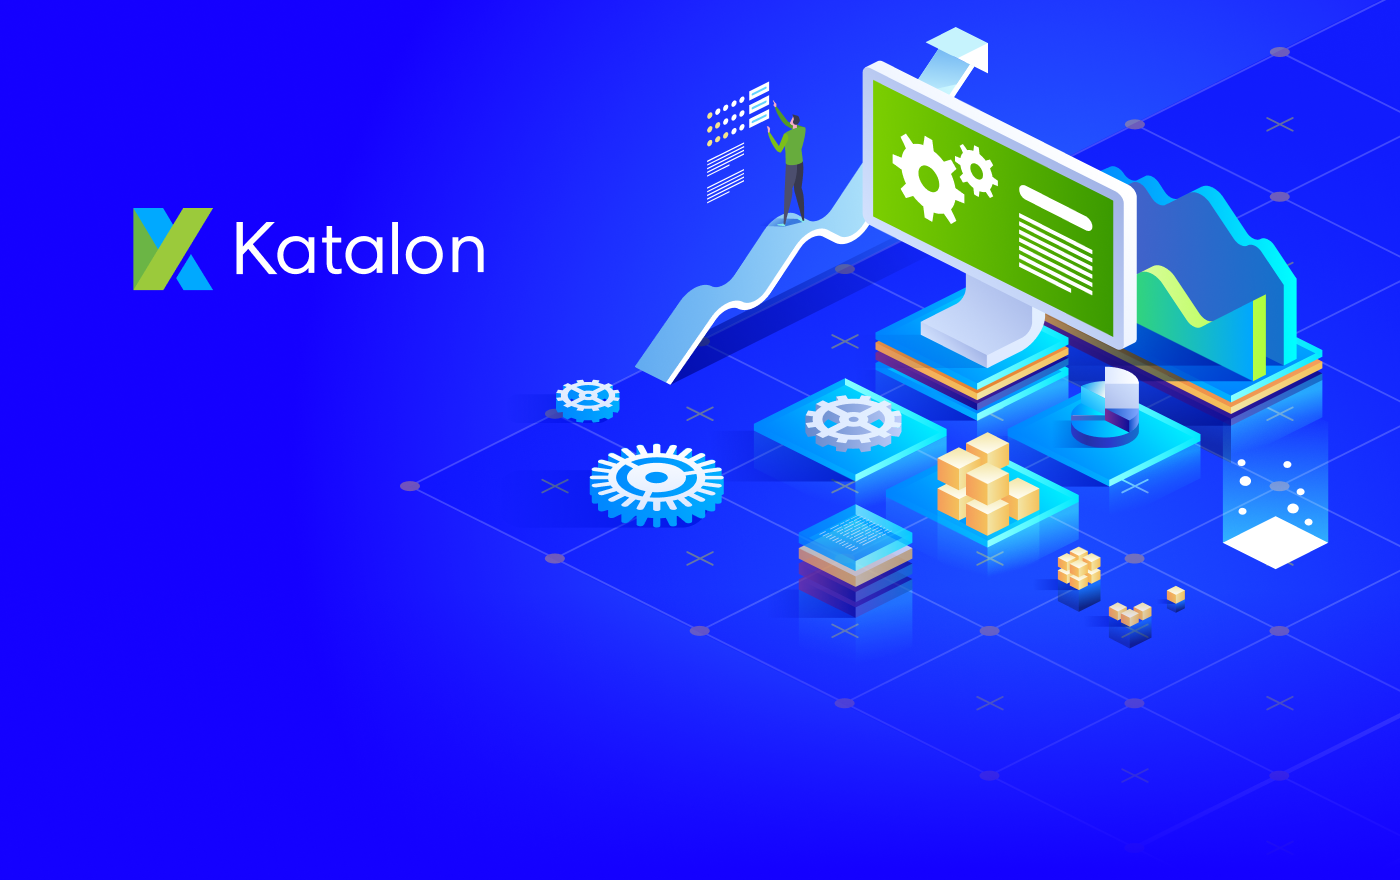 Execute Web, Mobile, and API Tests at Scale With Katalon